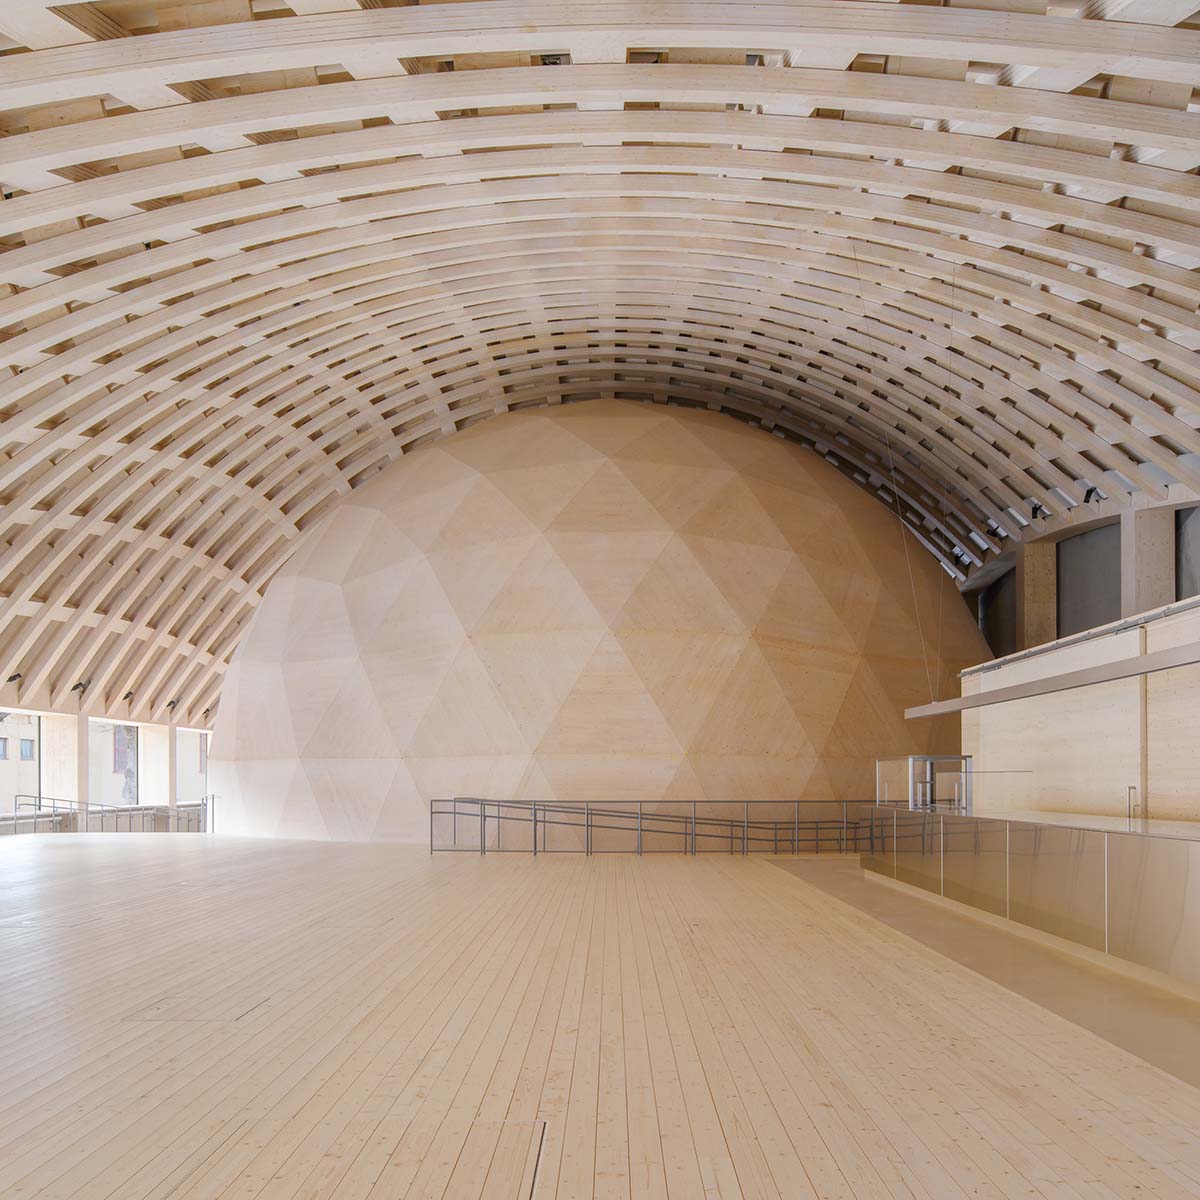 Elding Oscarson creates a spherical space with CLT dome as an extension of a museum in Stockholm: worldarchitecture.org/architecture-n… #architecture #Stockholm